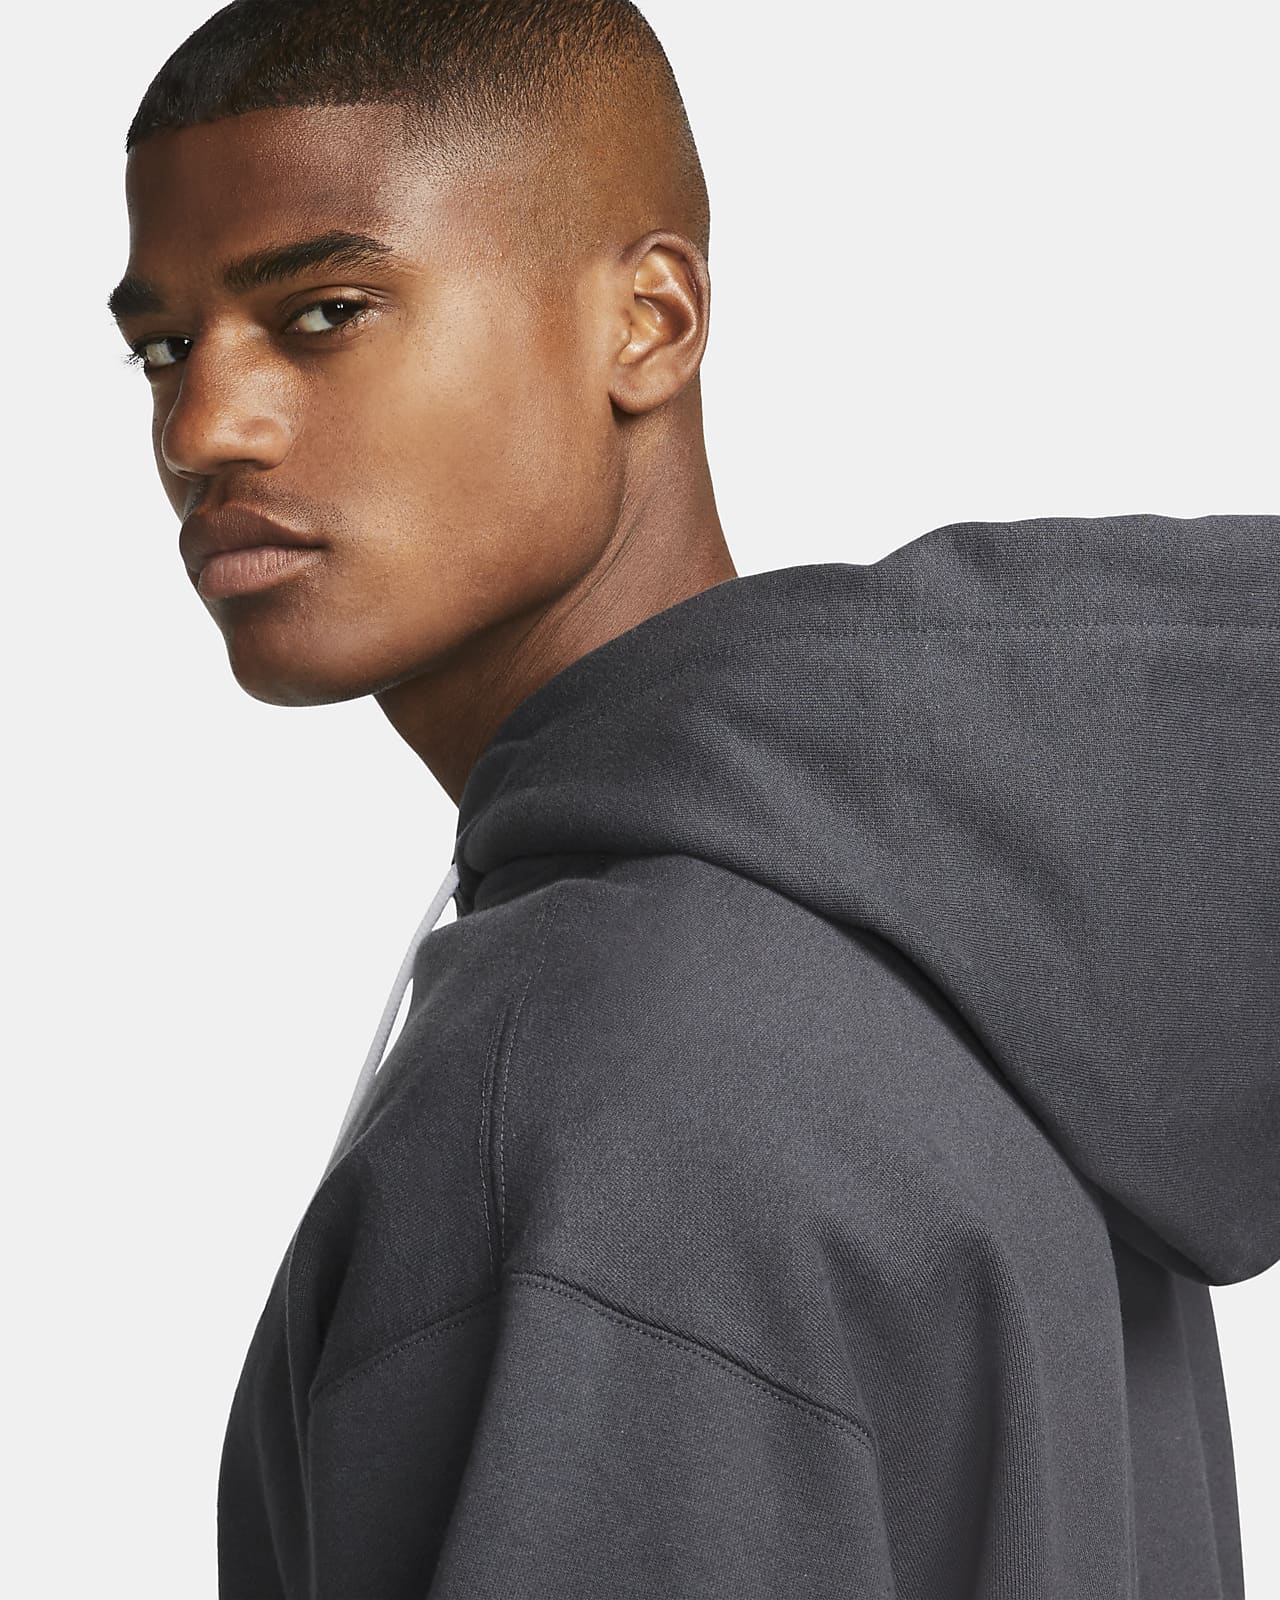 Sweat à capuche et zip Nike « Made in the USA » pour Homme. Nike FR